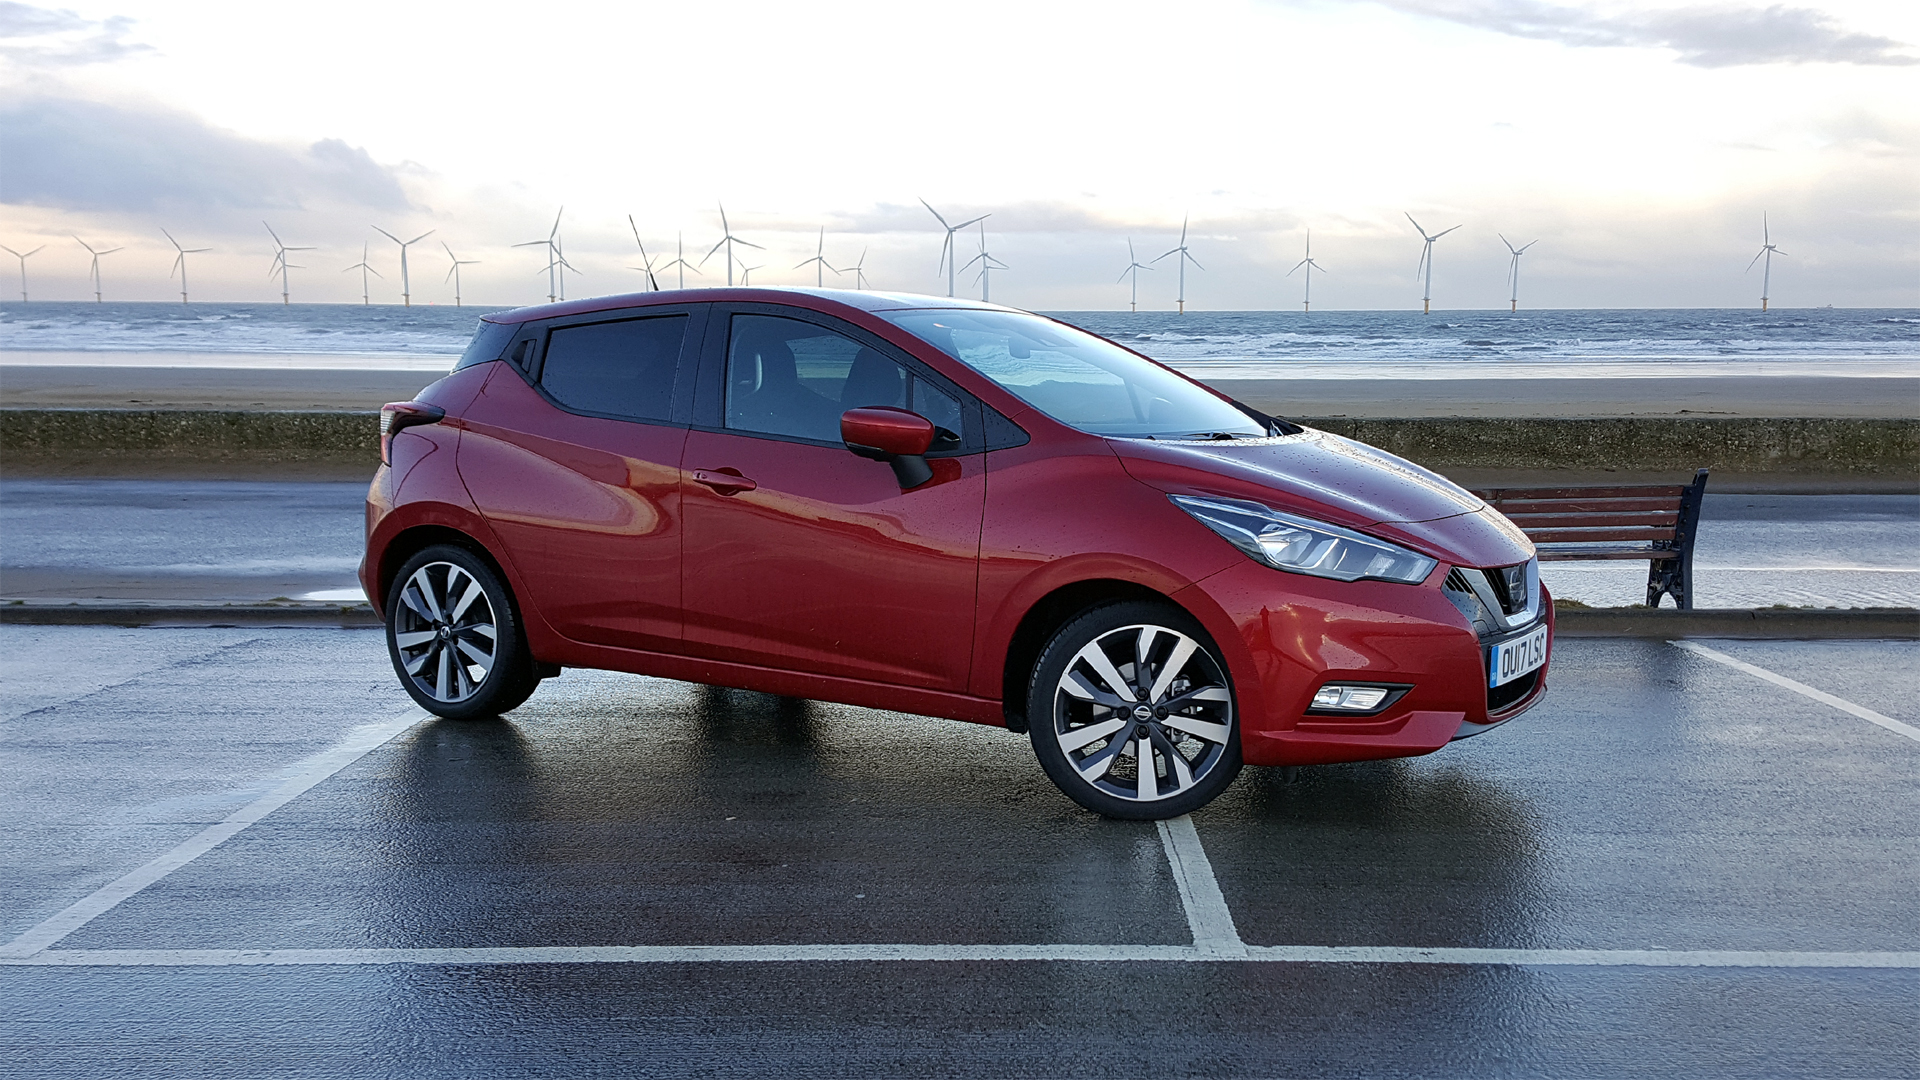 2018 Nissan Micra S Test Drive Review